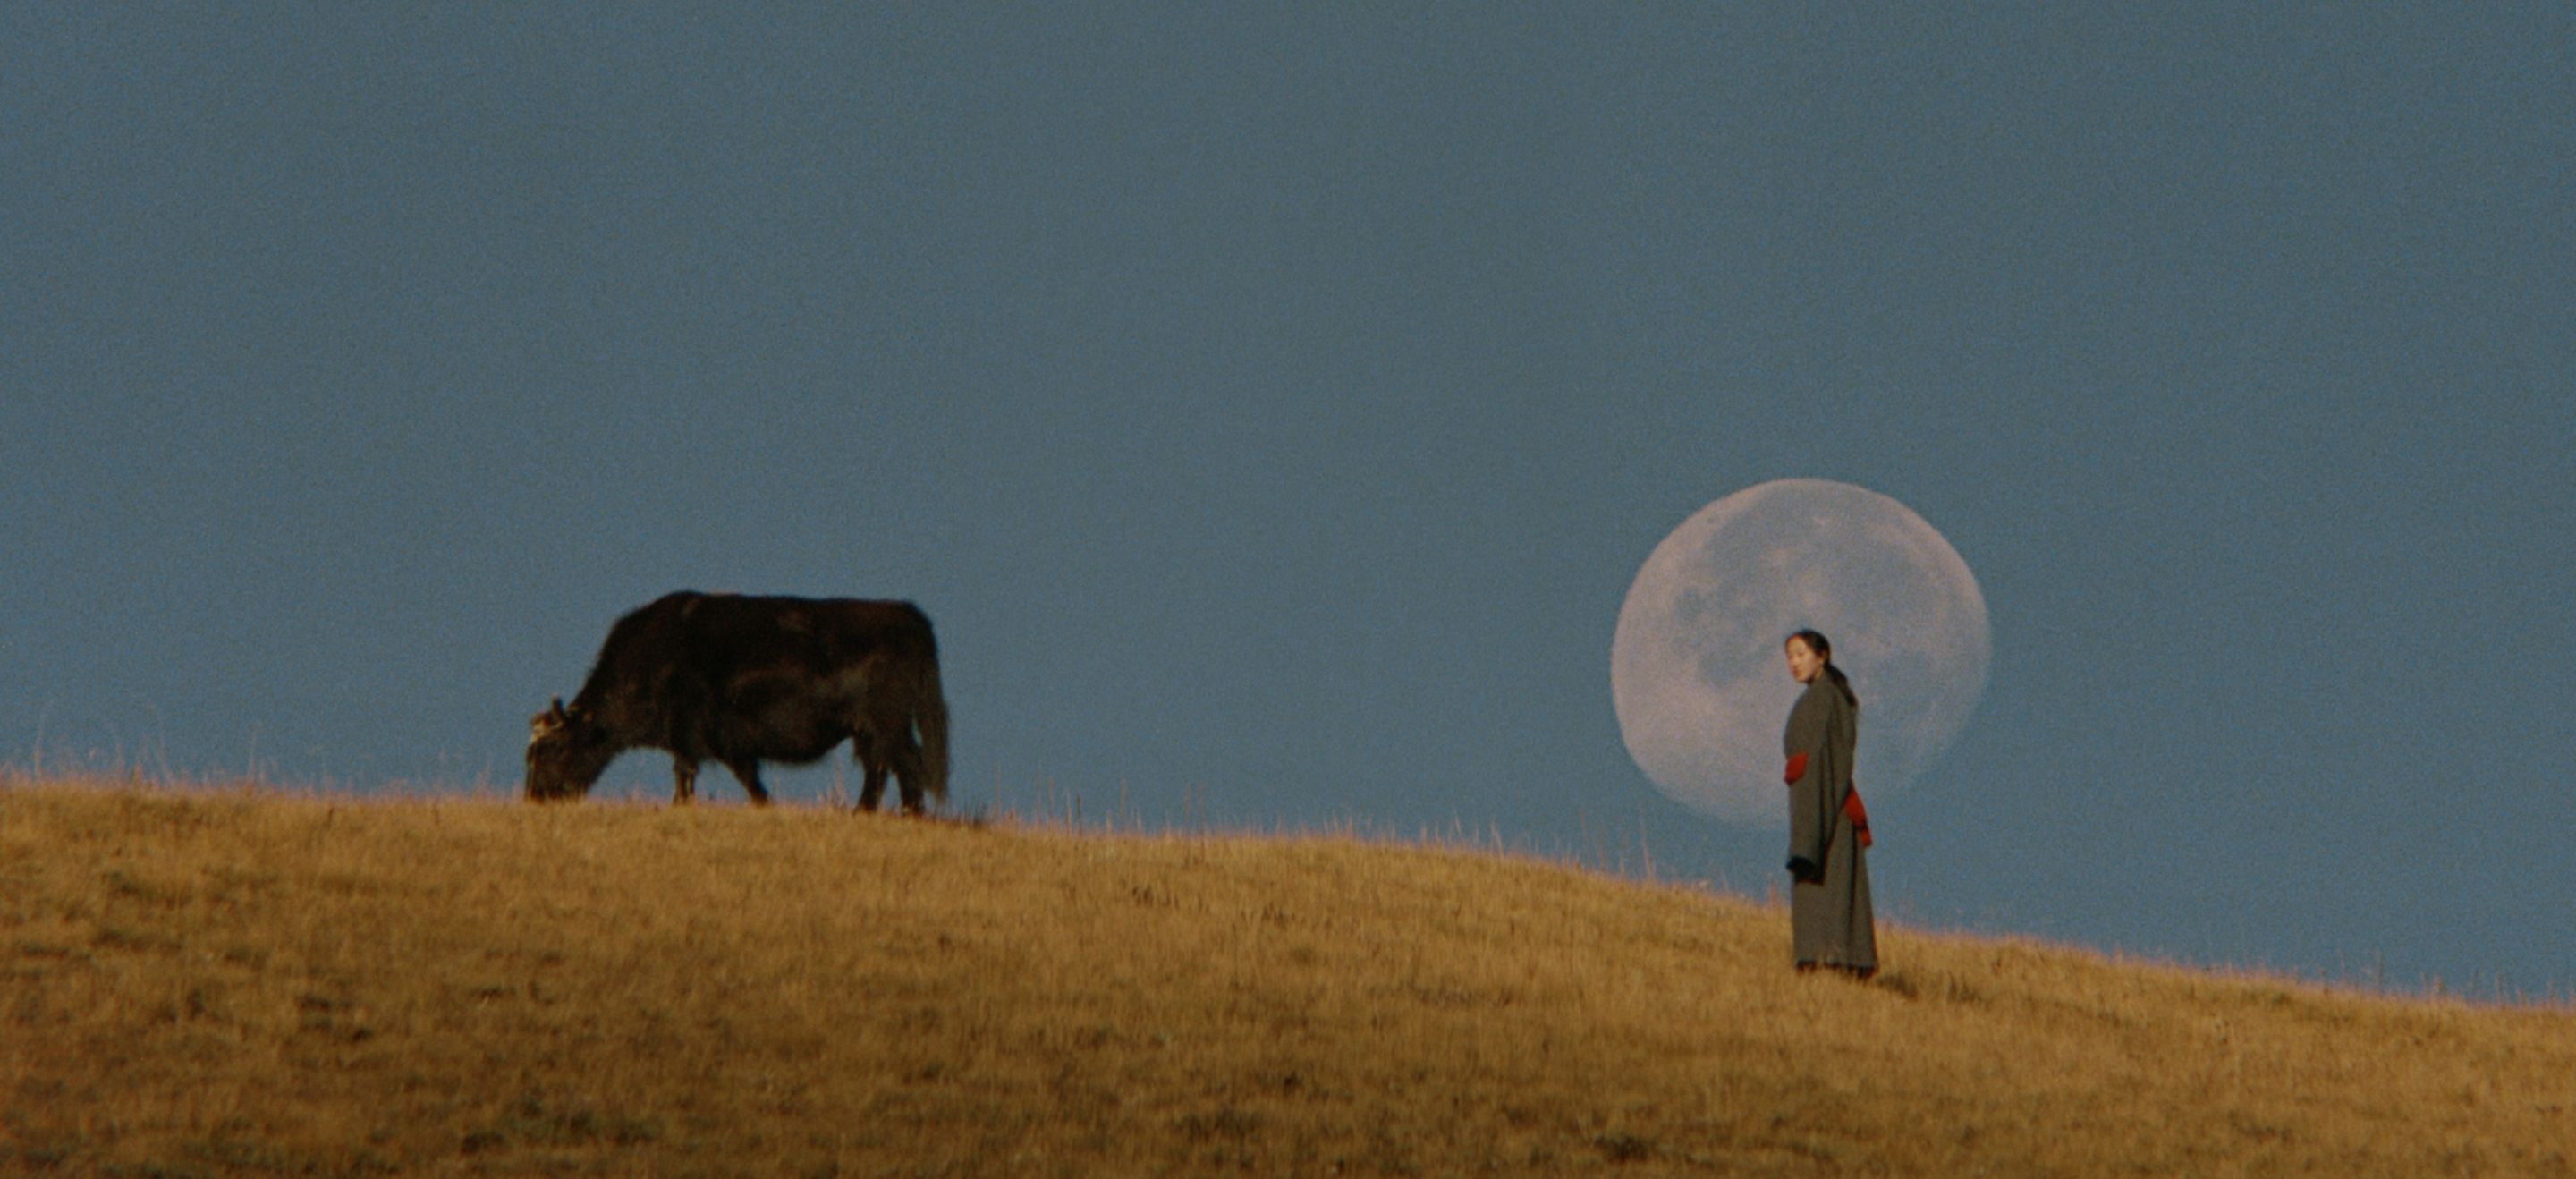 Tibetan woman standing on a grassy field with a cow grazing ahead of her, against a blue sky and moon